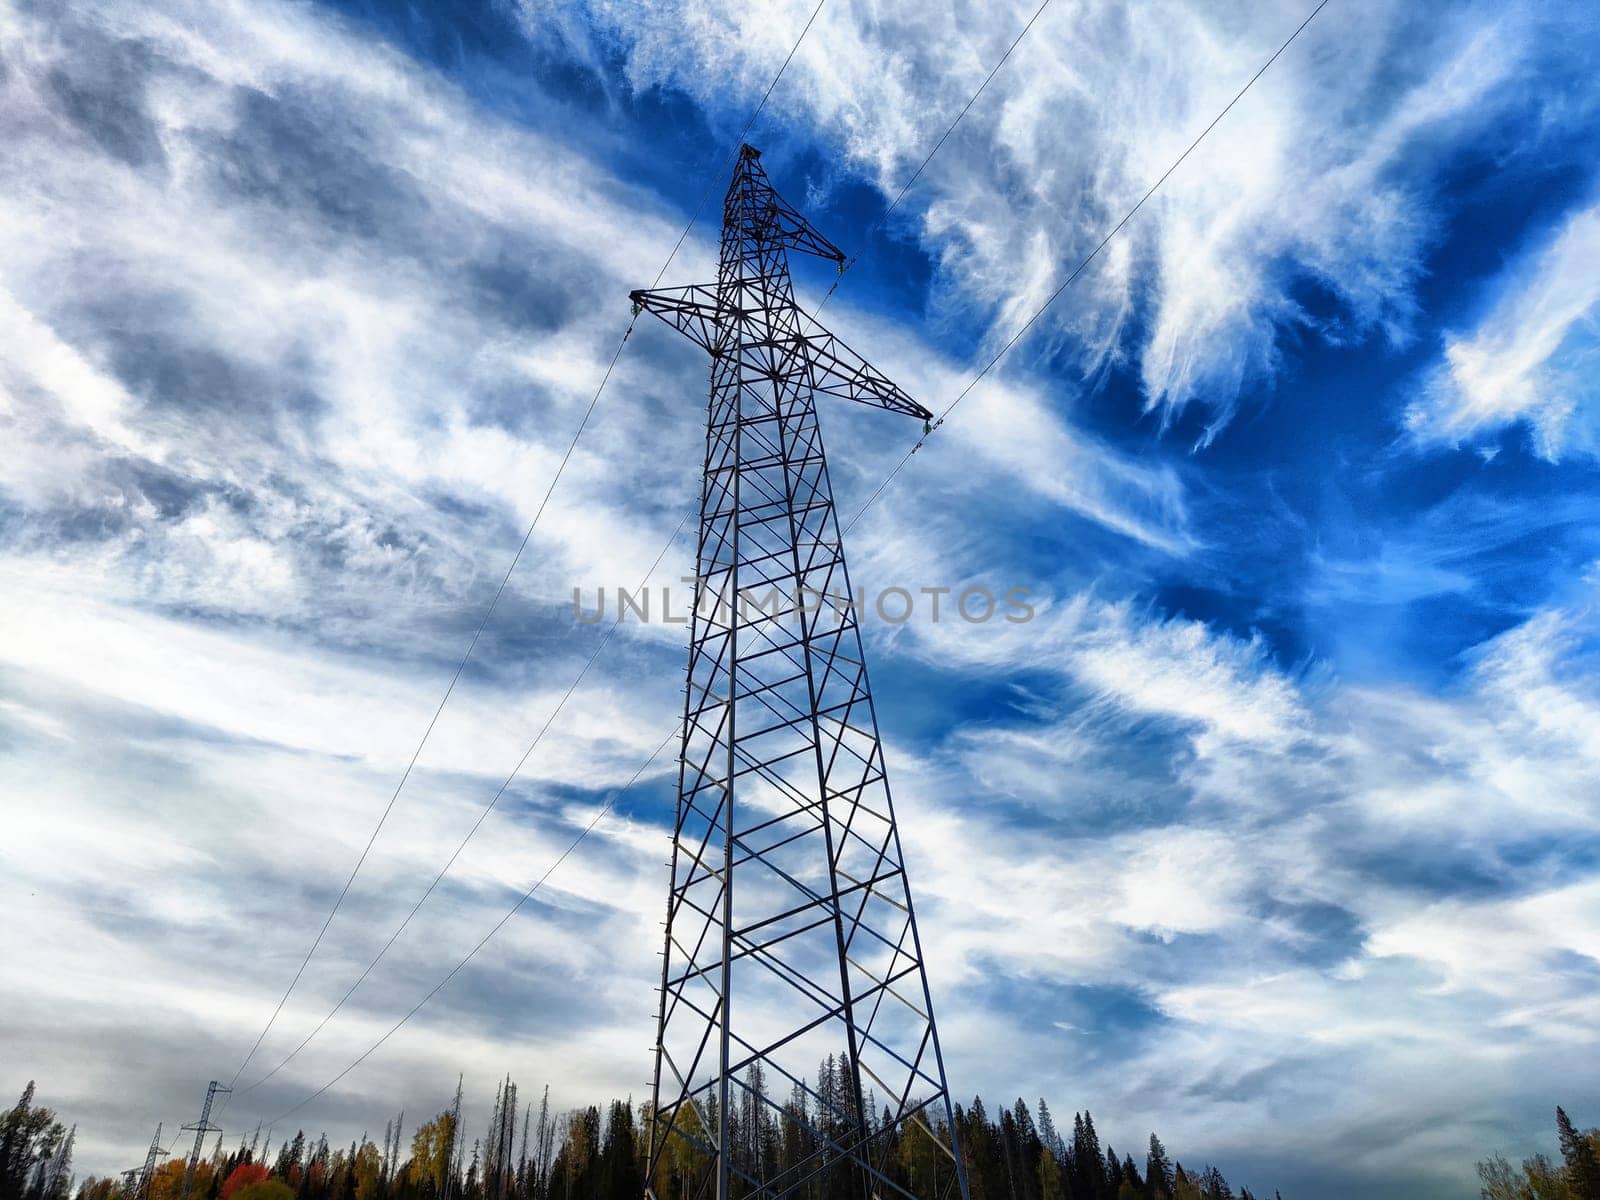 Power lines on a hill, hill or in the mountains against a blue sky with white clouds. Electric lines, towers, wires in the landscape by keleny